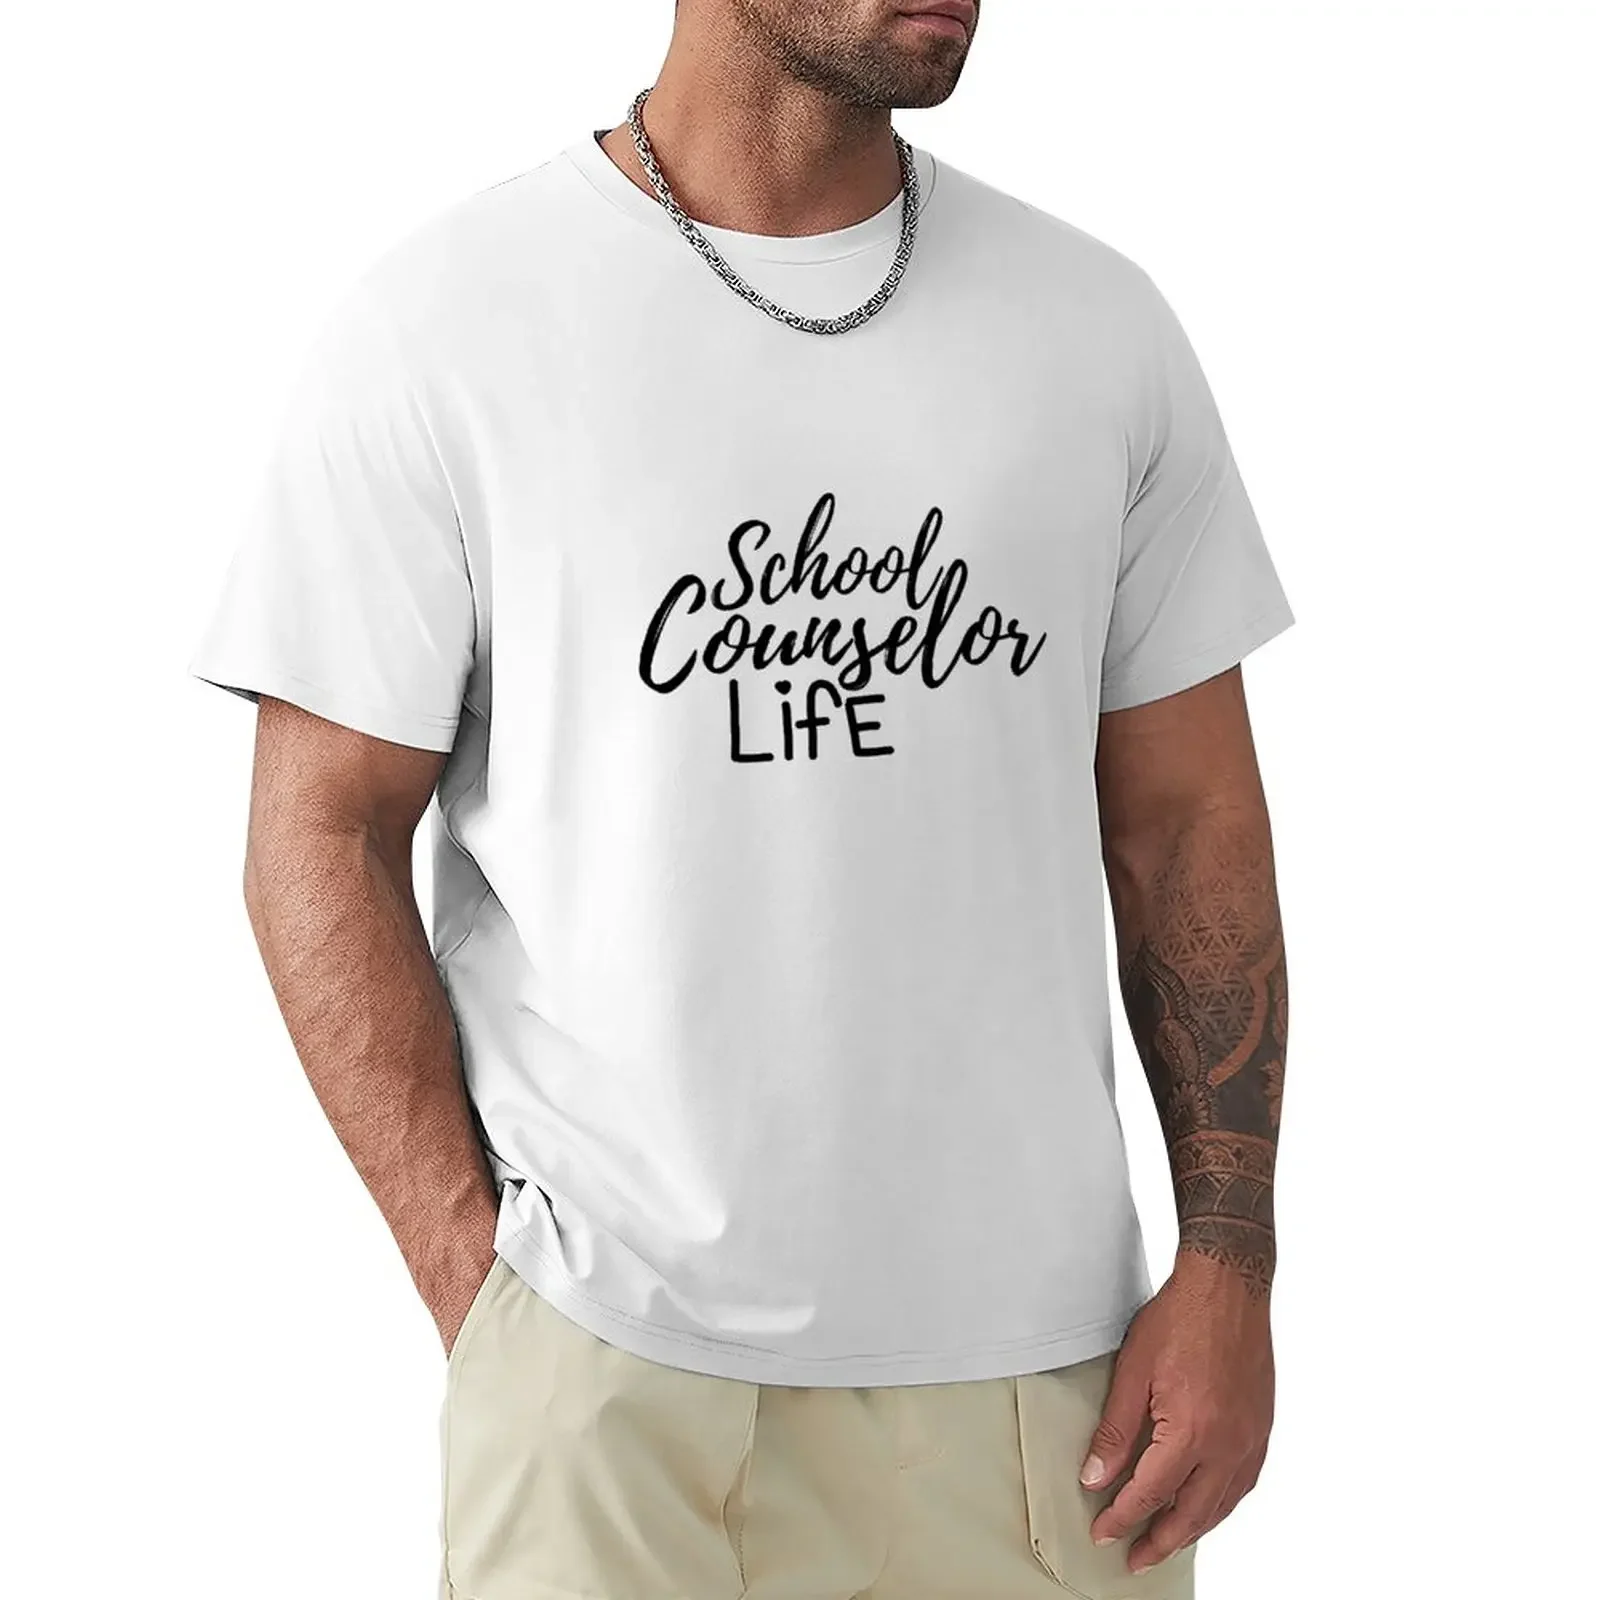 

School Counselor Life T-Shirt funnys heavyweights plus sizes mens graphic t-shirts big and tall